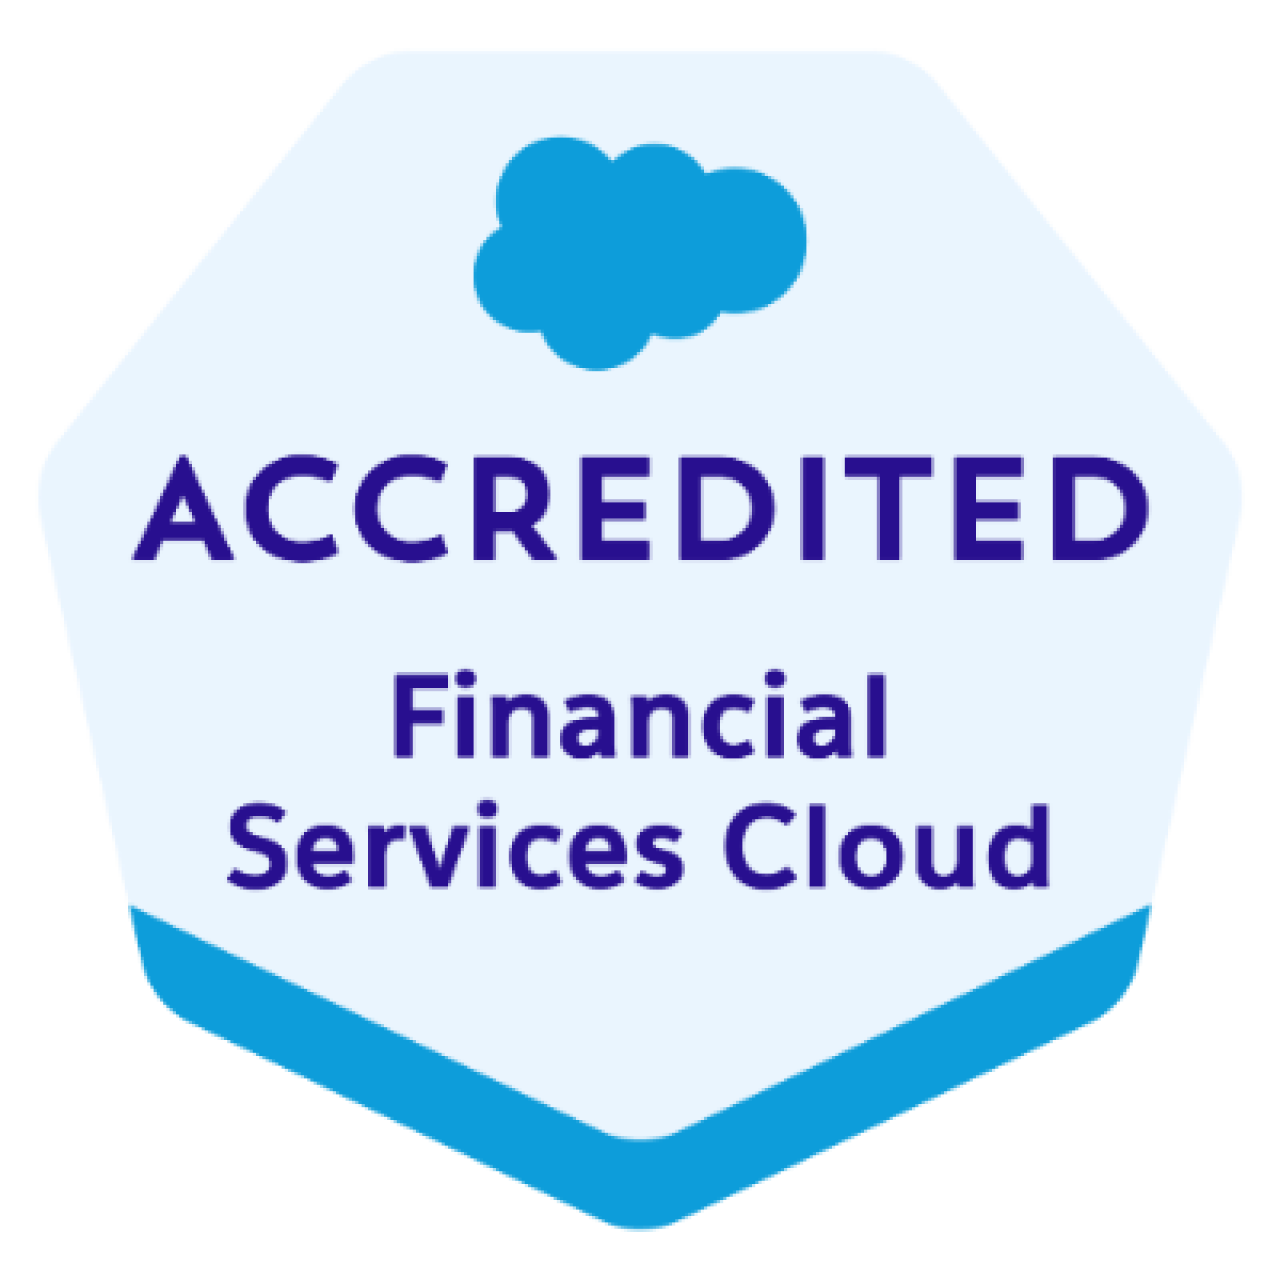 salesforce financial services cloud accredited professional badge.